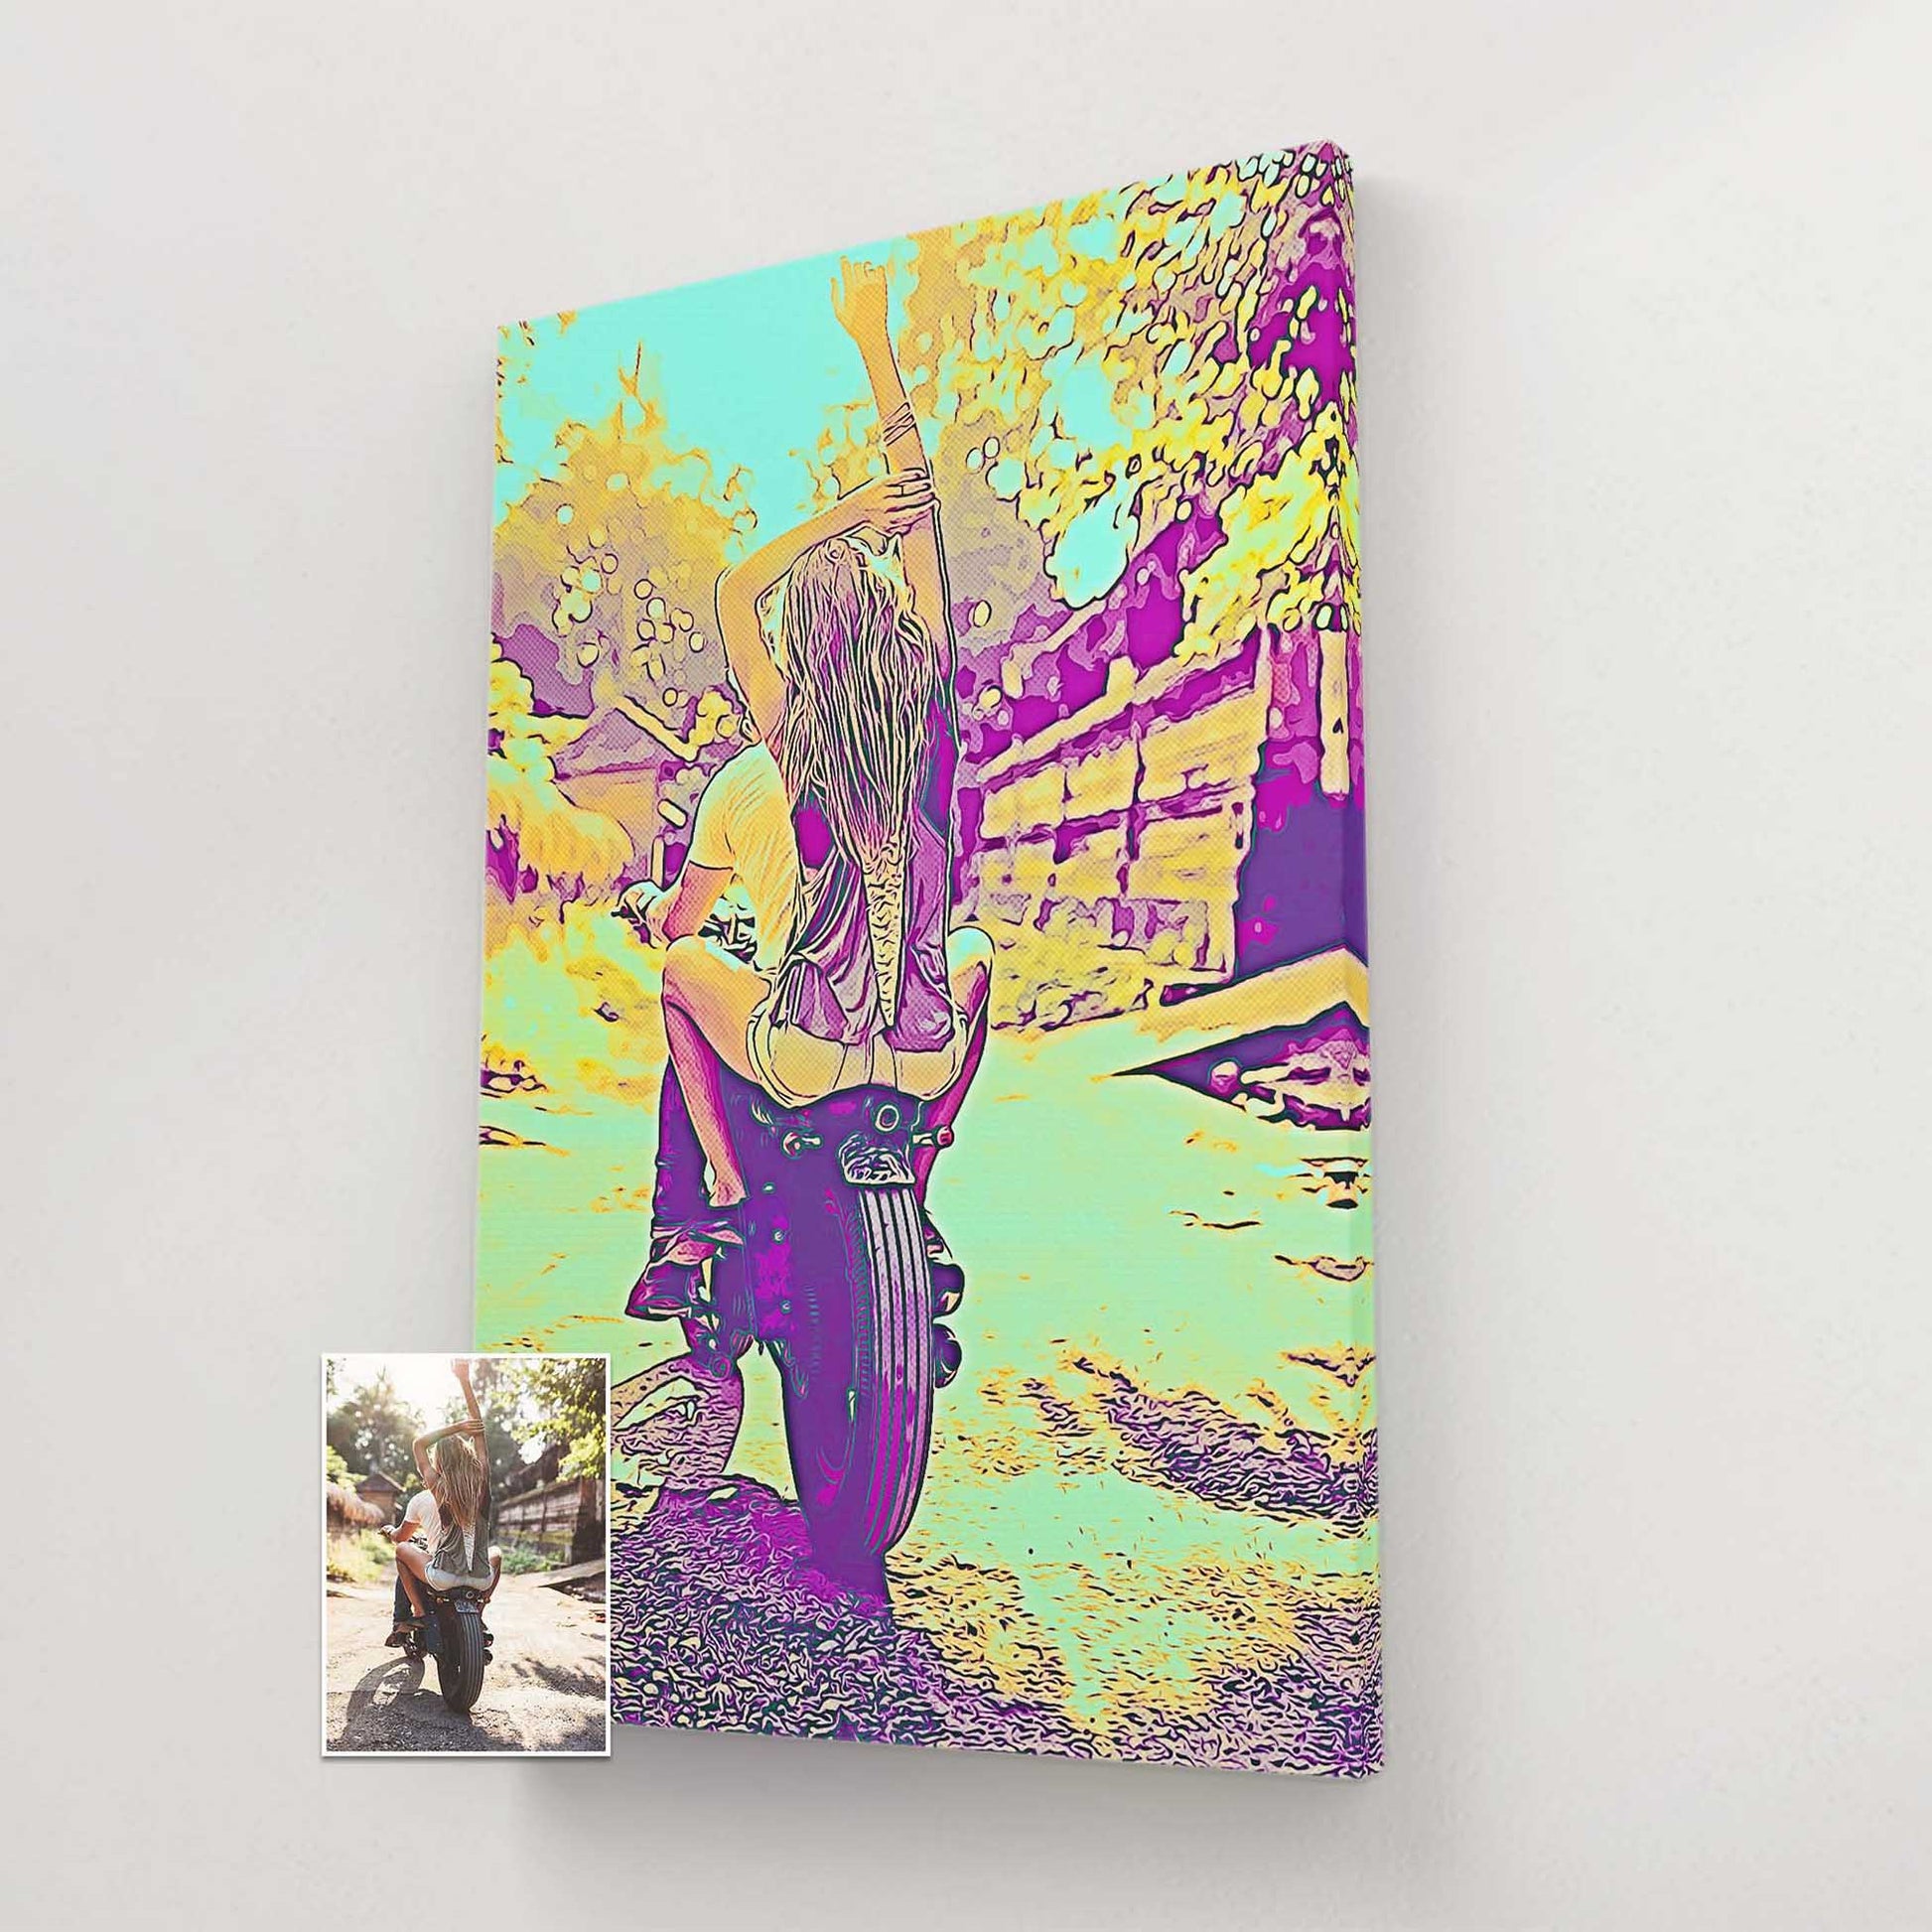 Infuse your home with a burst of creativity and laughter with our Personalised Blue and Yellow Cartoon Canvas. These unique artworks, crafted from your photos, showcase a funky and fun halftone style